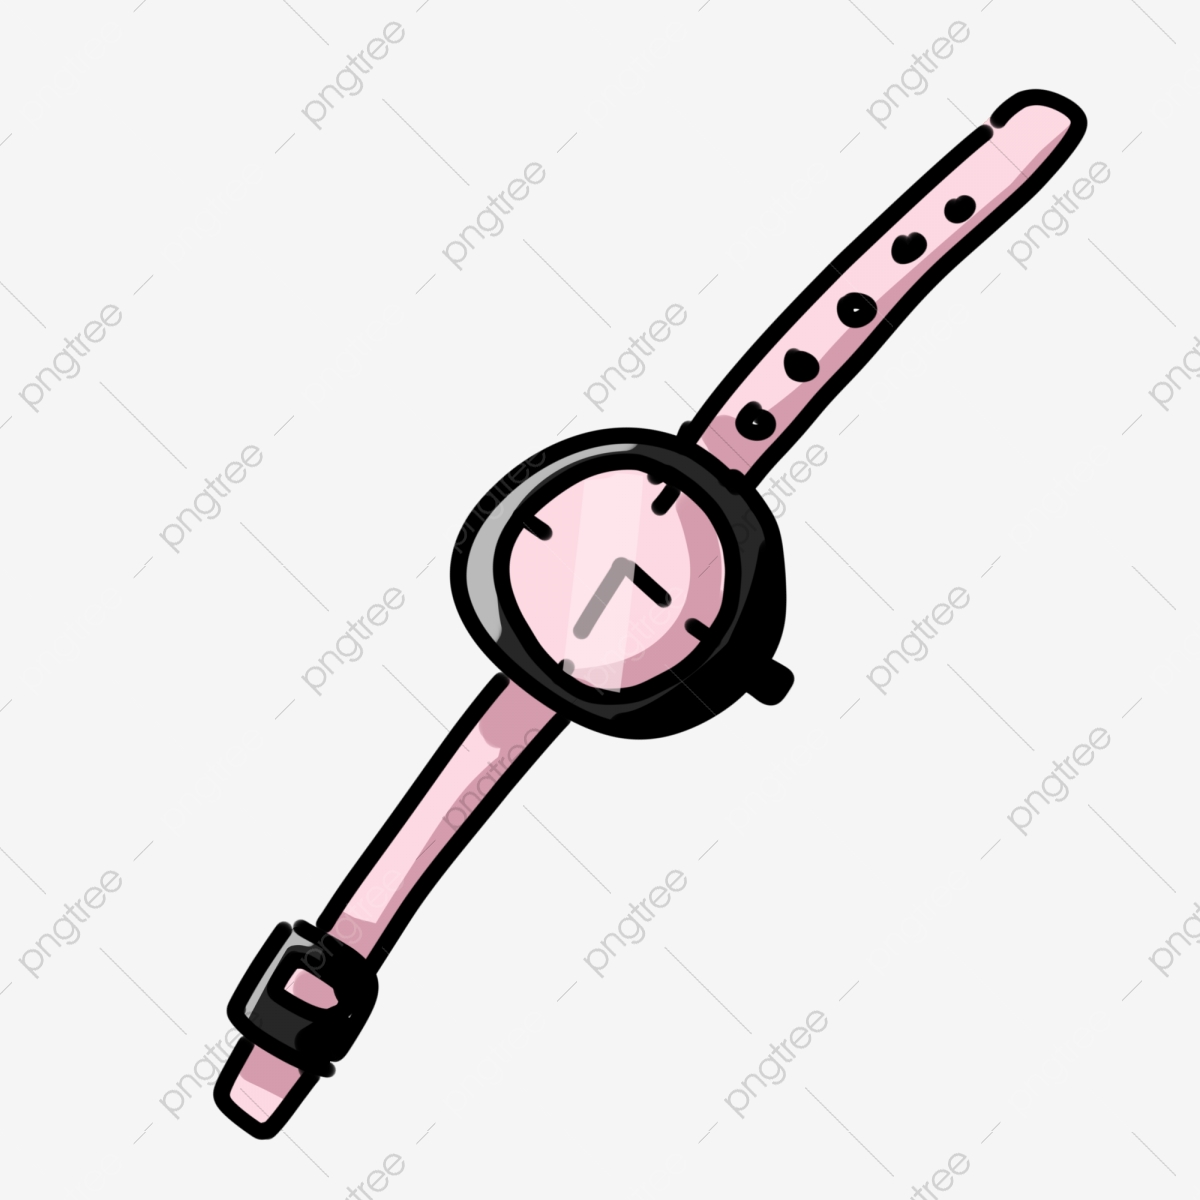 see clipart ladies watch